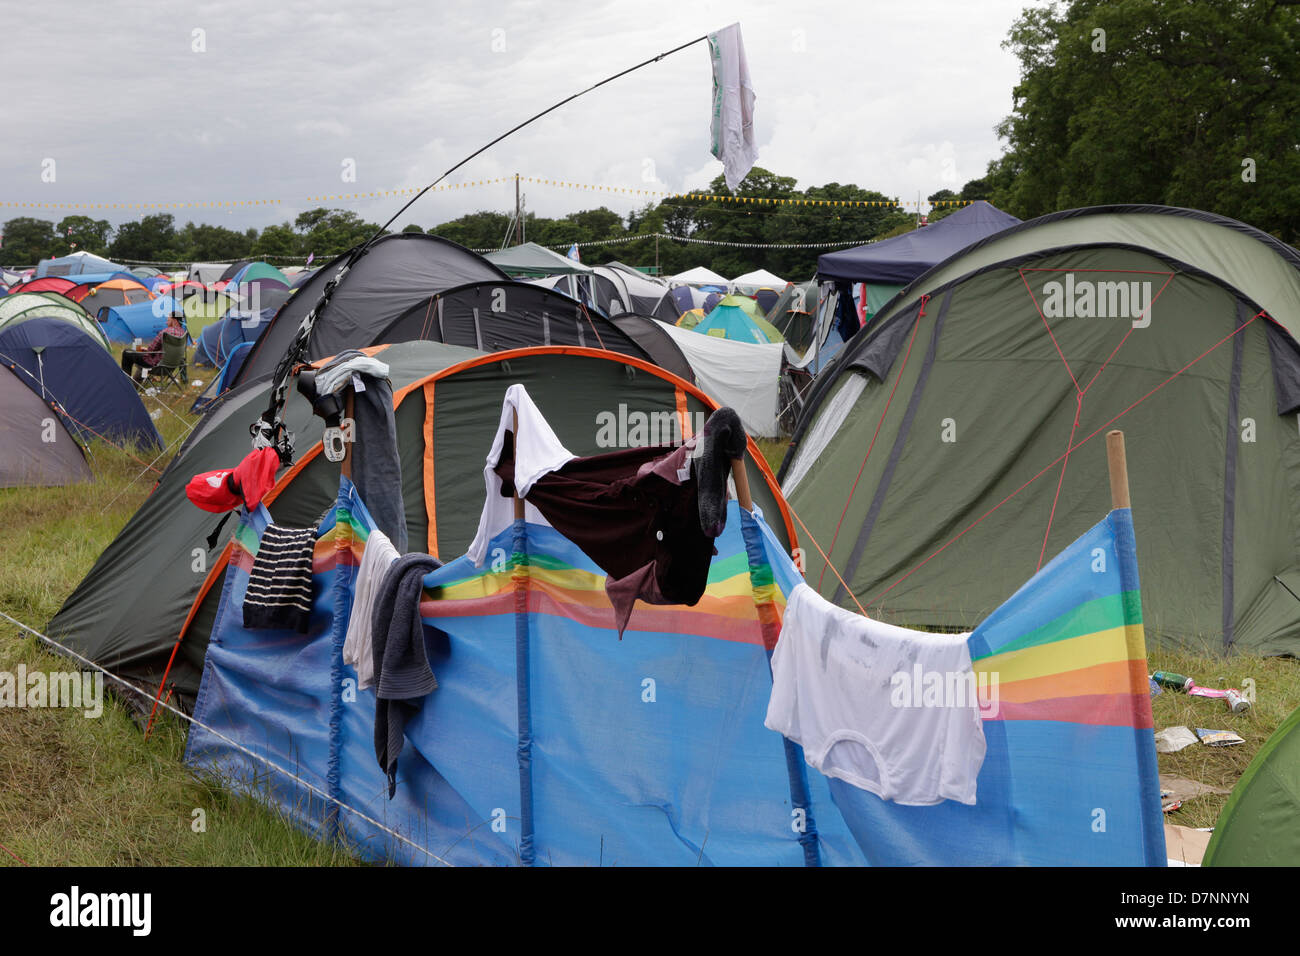 DRYING CLOTHING, TENTS IN CAMPSITES AND FESTIVAL GOERS AT LATITUDE FESTIVAL, 2012 Stock Photo